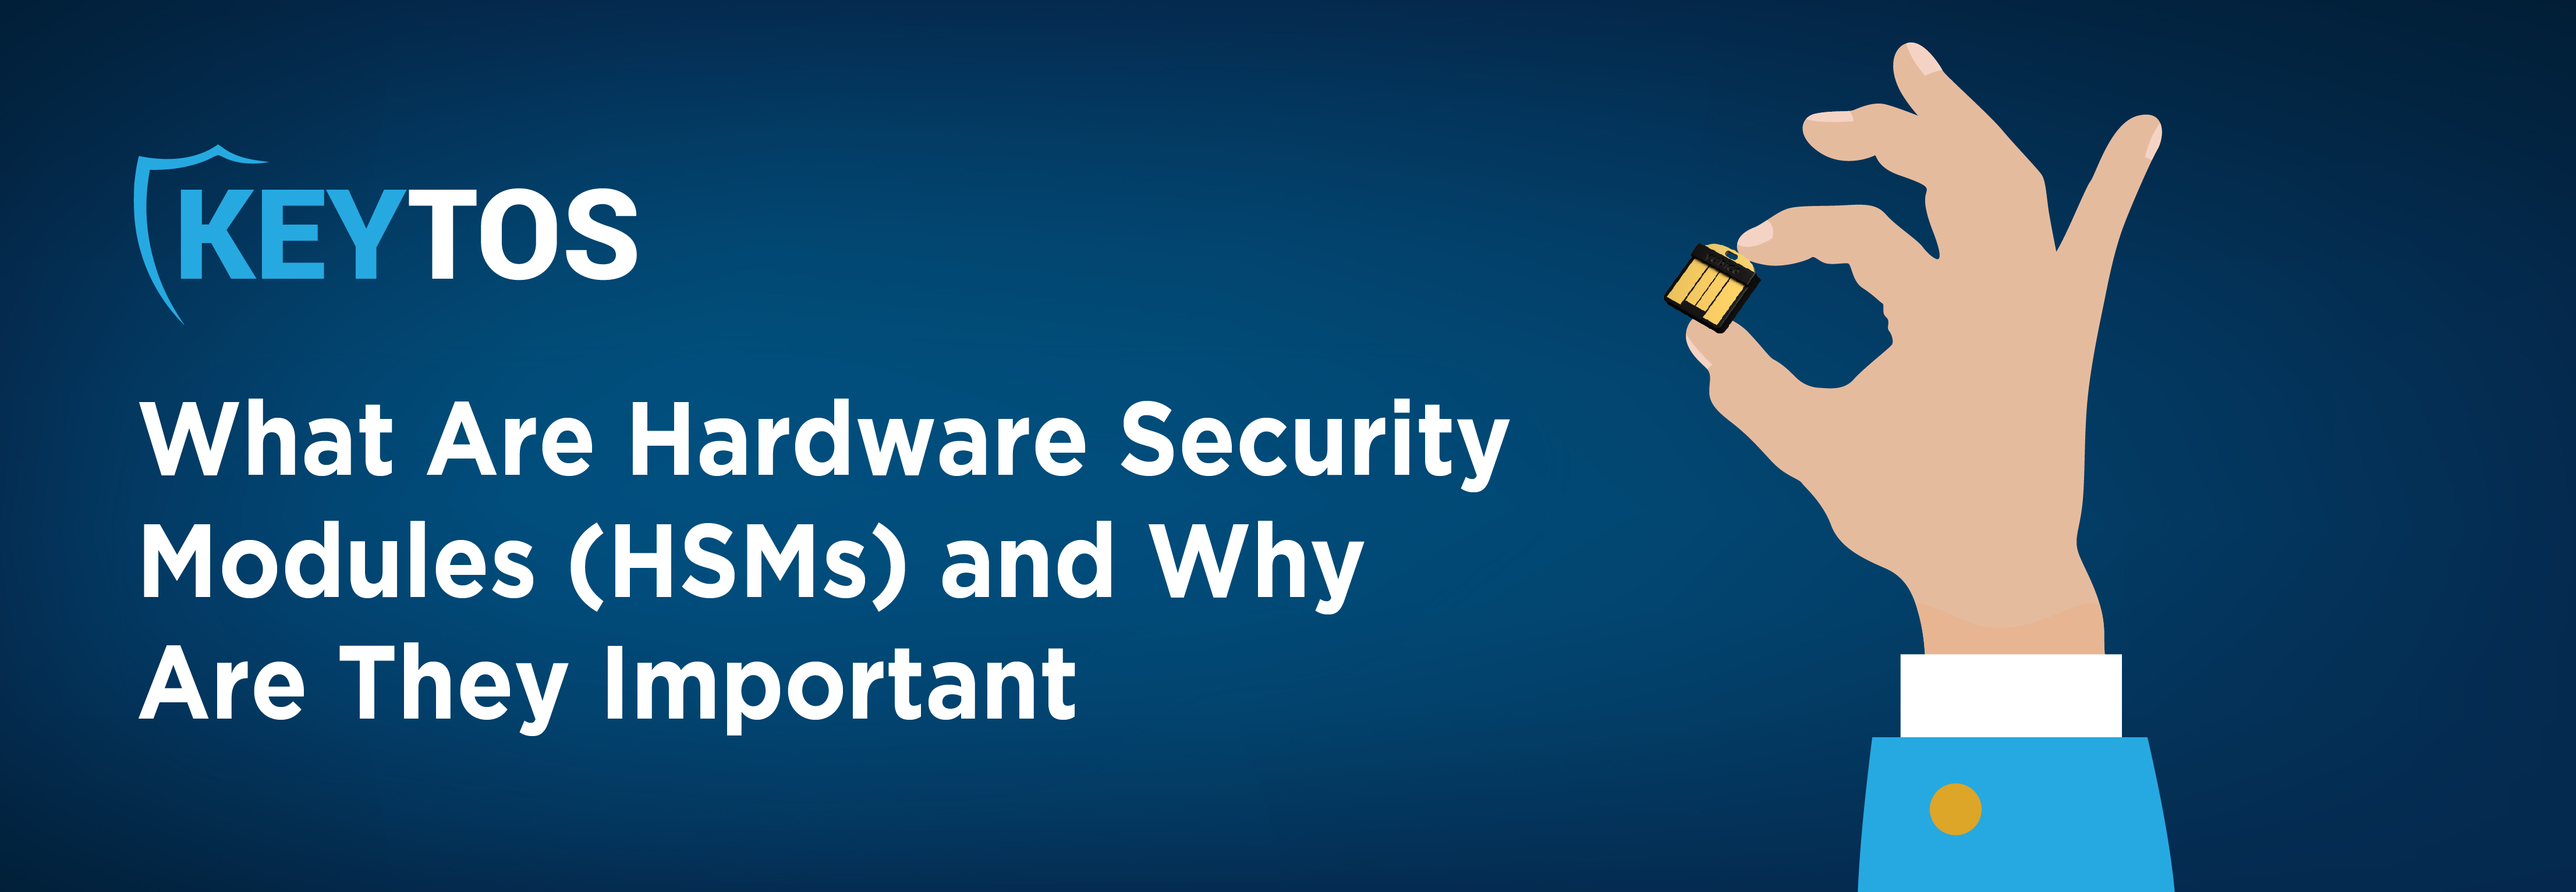 What are HSMs? Why are Hardware Security Modules important?